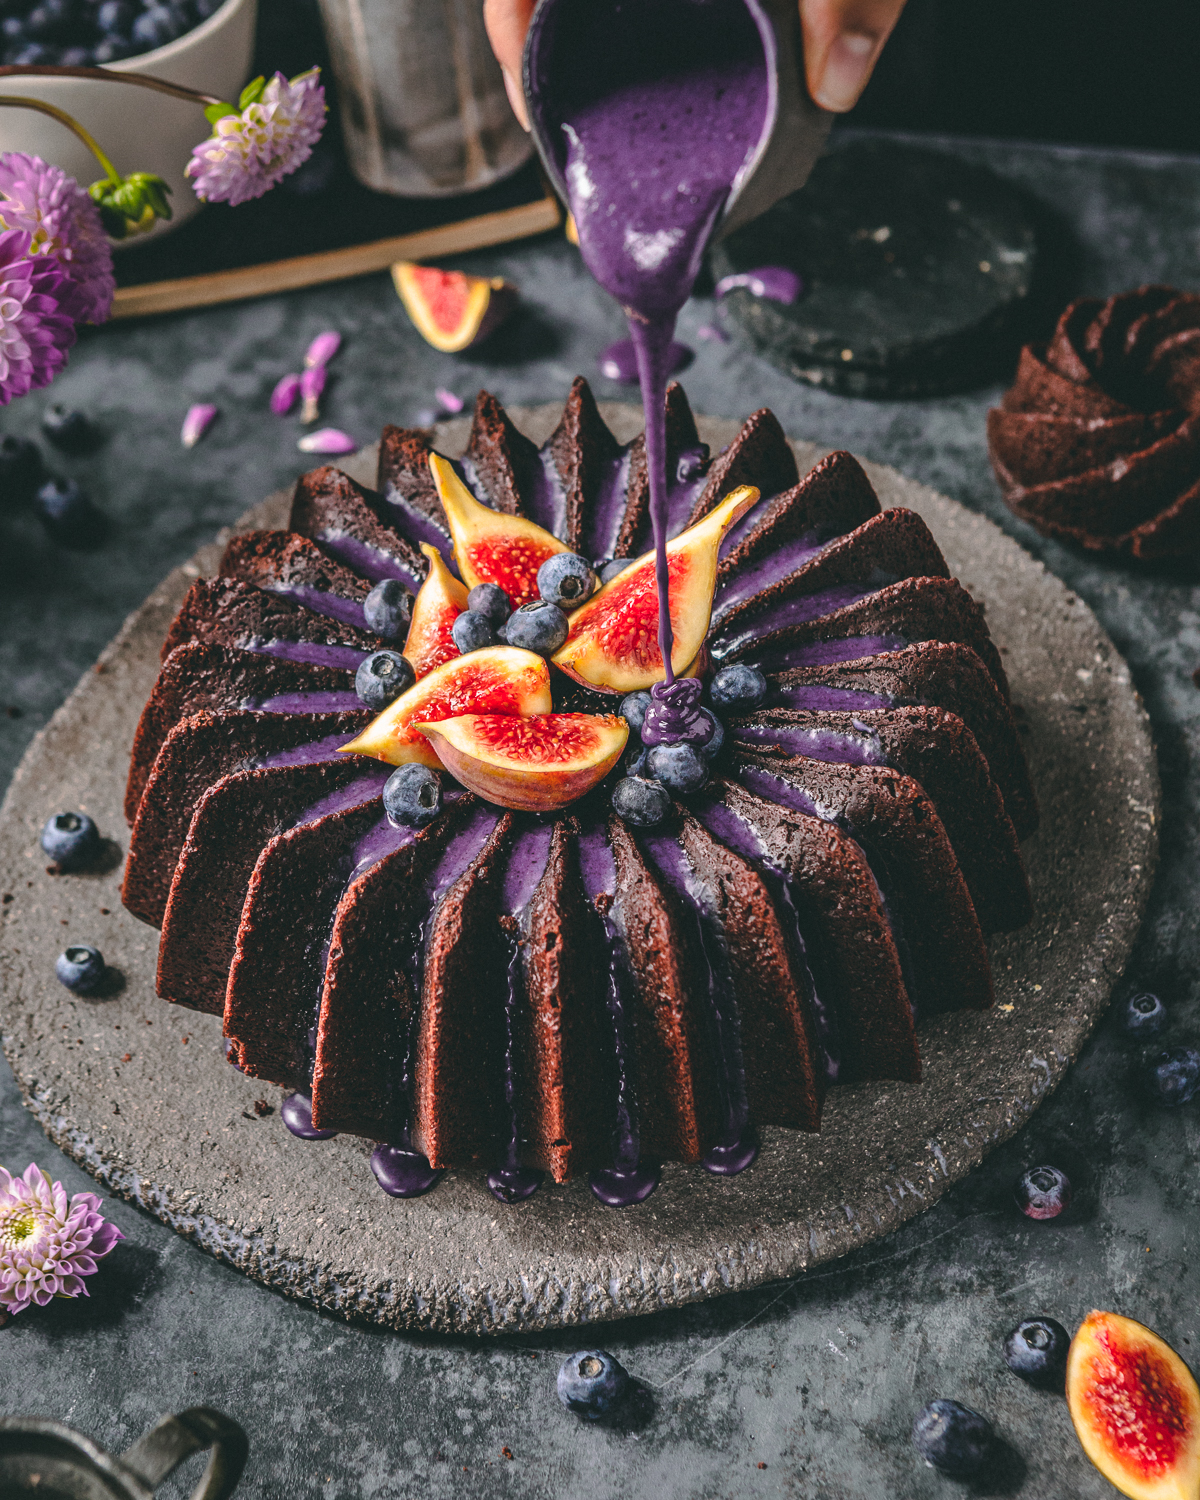 Chocolate Bundt cake with blueberry icing